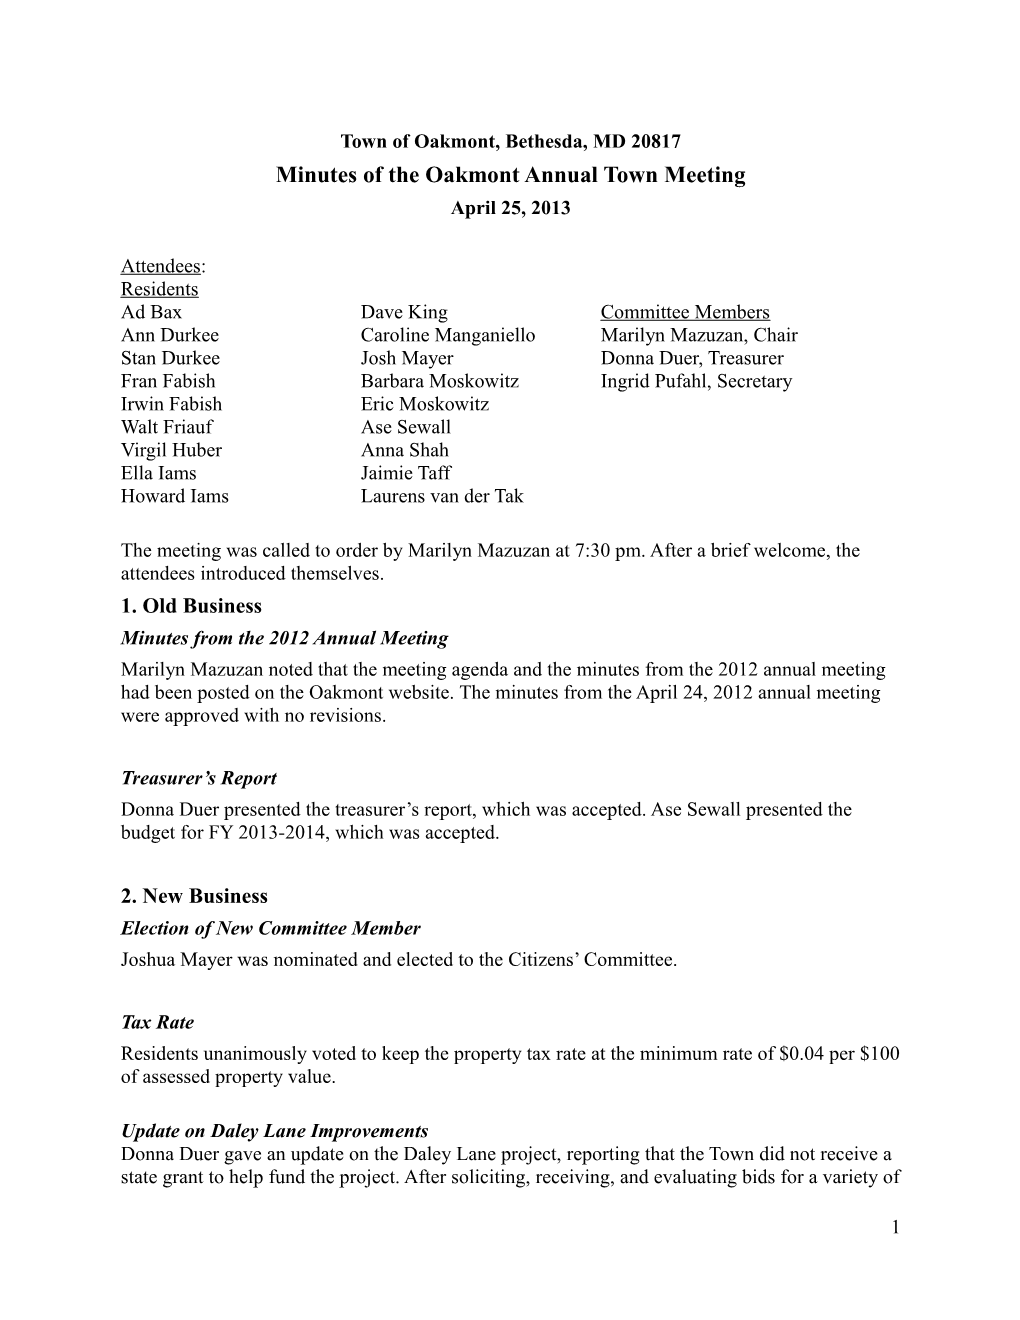 Minutes of the Oakmont Annual Town Meeting